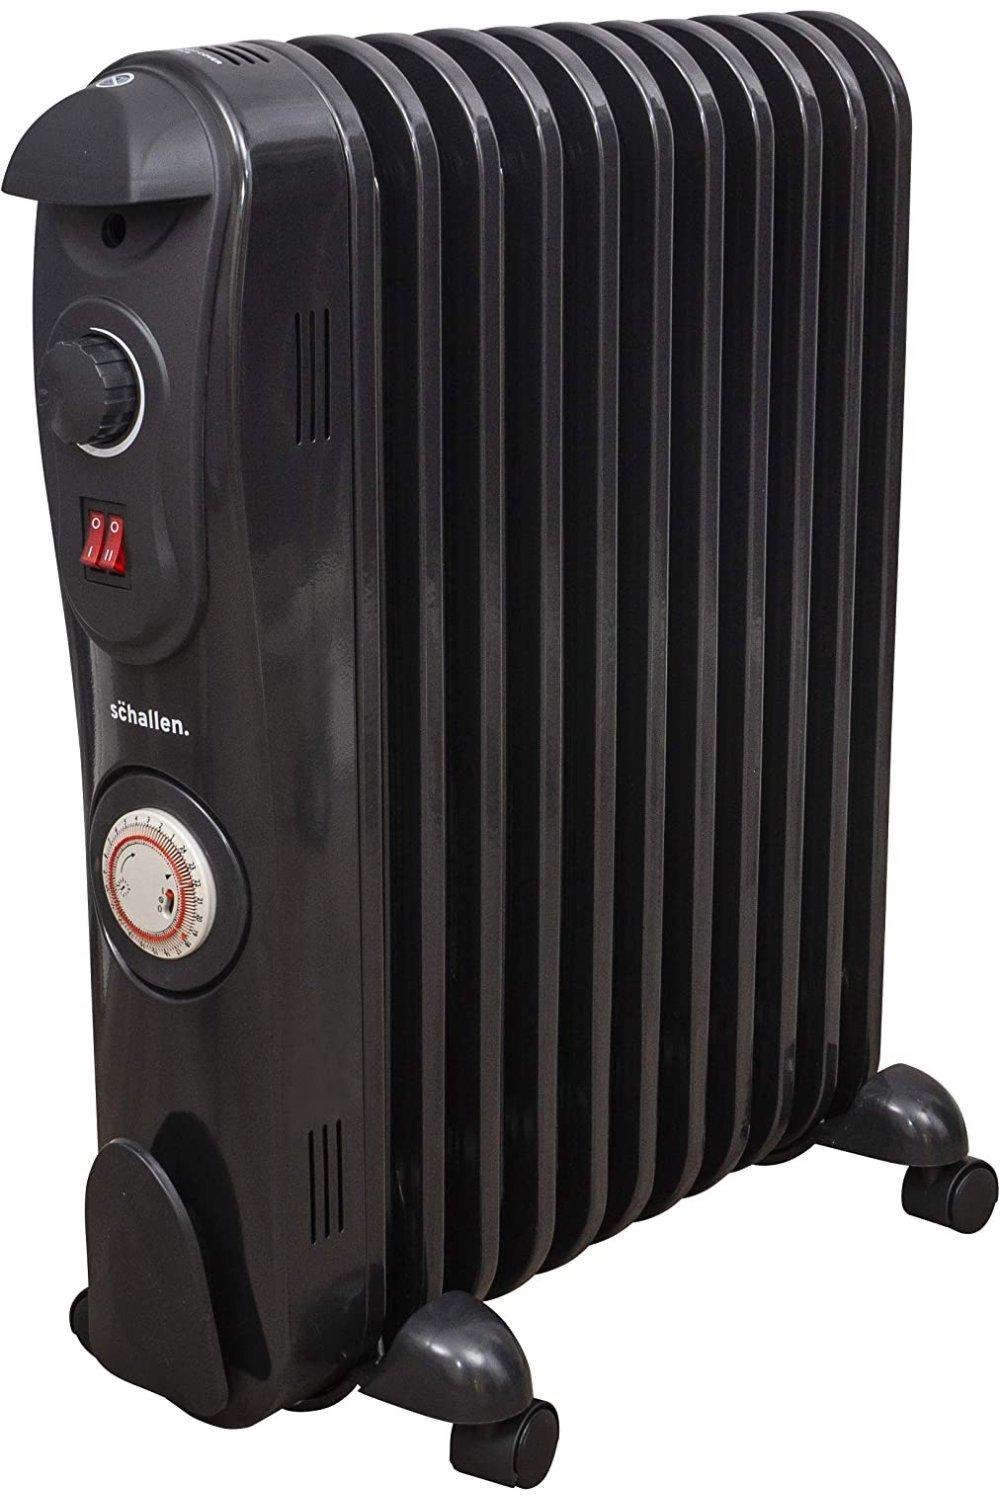 Black Portable Electric Slim Oil Filled Radiator Heater with Adjustable Temperature Thermostat, 3 Heat Settings & Safety Cut Off (2500W - 11 Fin with